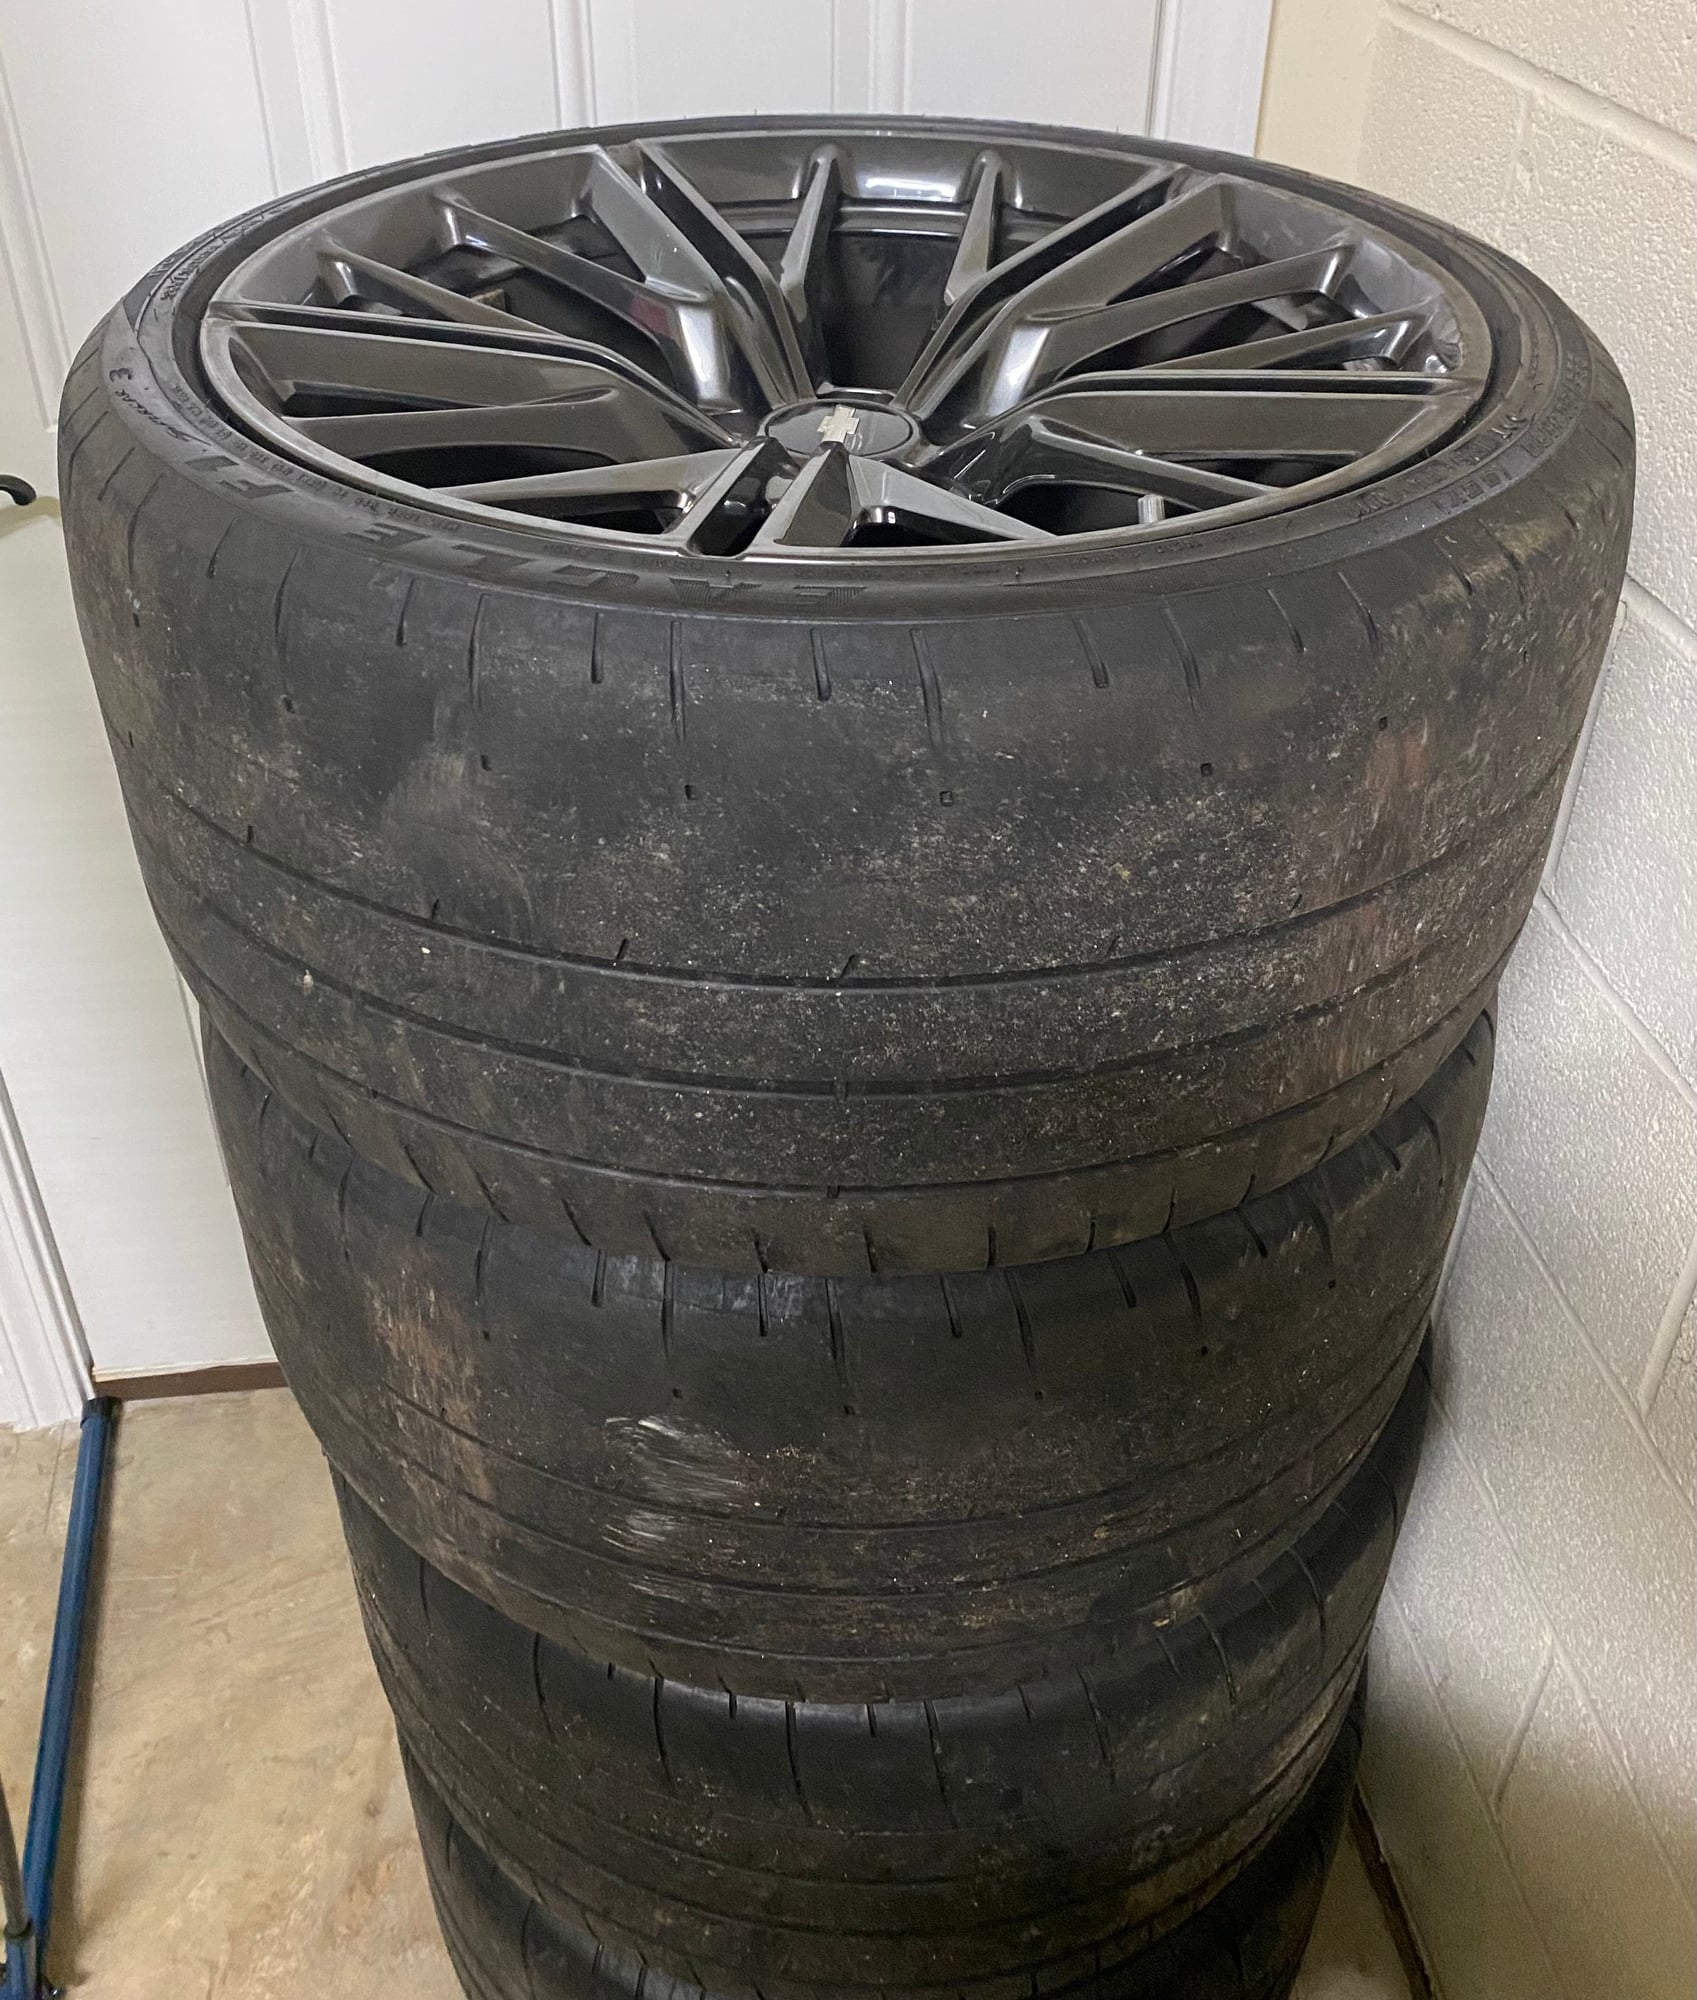 Wheels and Tires/Axles - 2018 Camaro Zl1 Factory 20 inch Wheels takeoff 17k miles - Used - All Years Any Make All Models - Asheville, NC 28804, United States